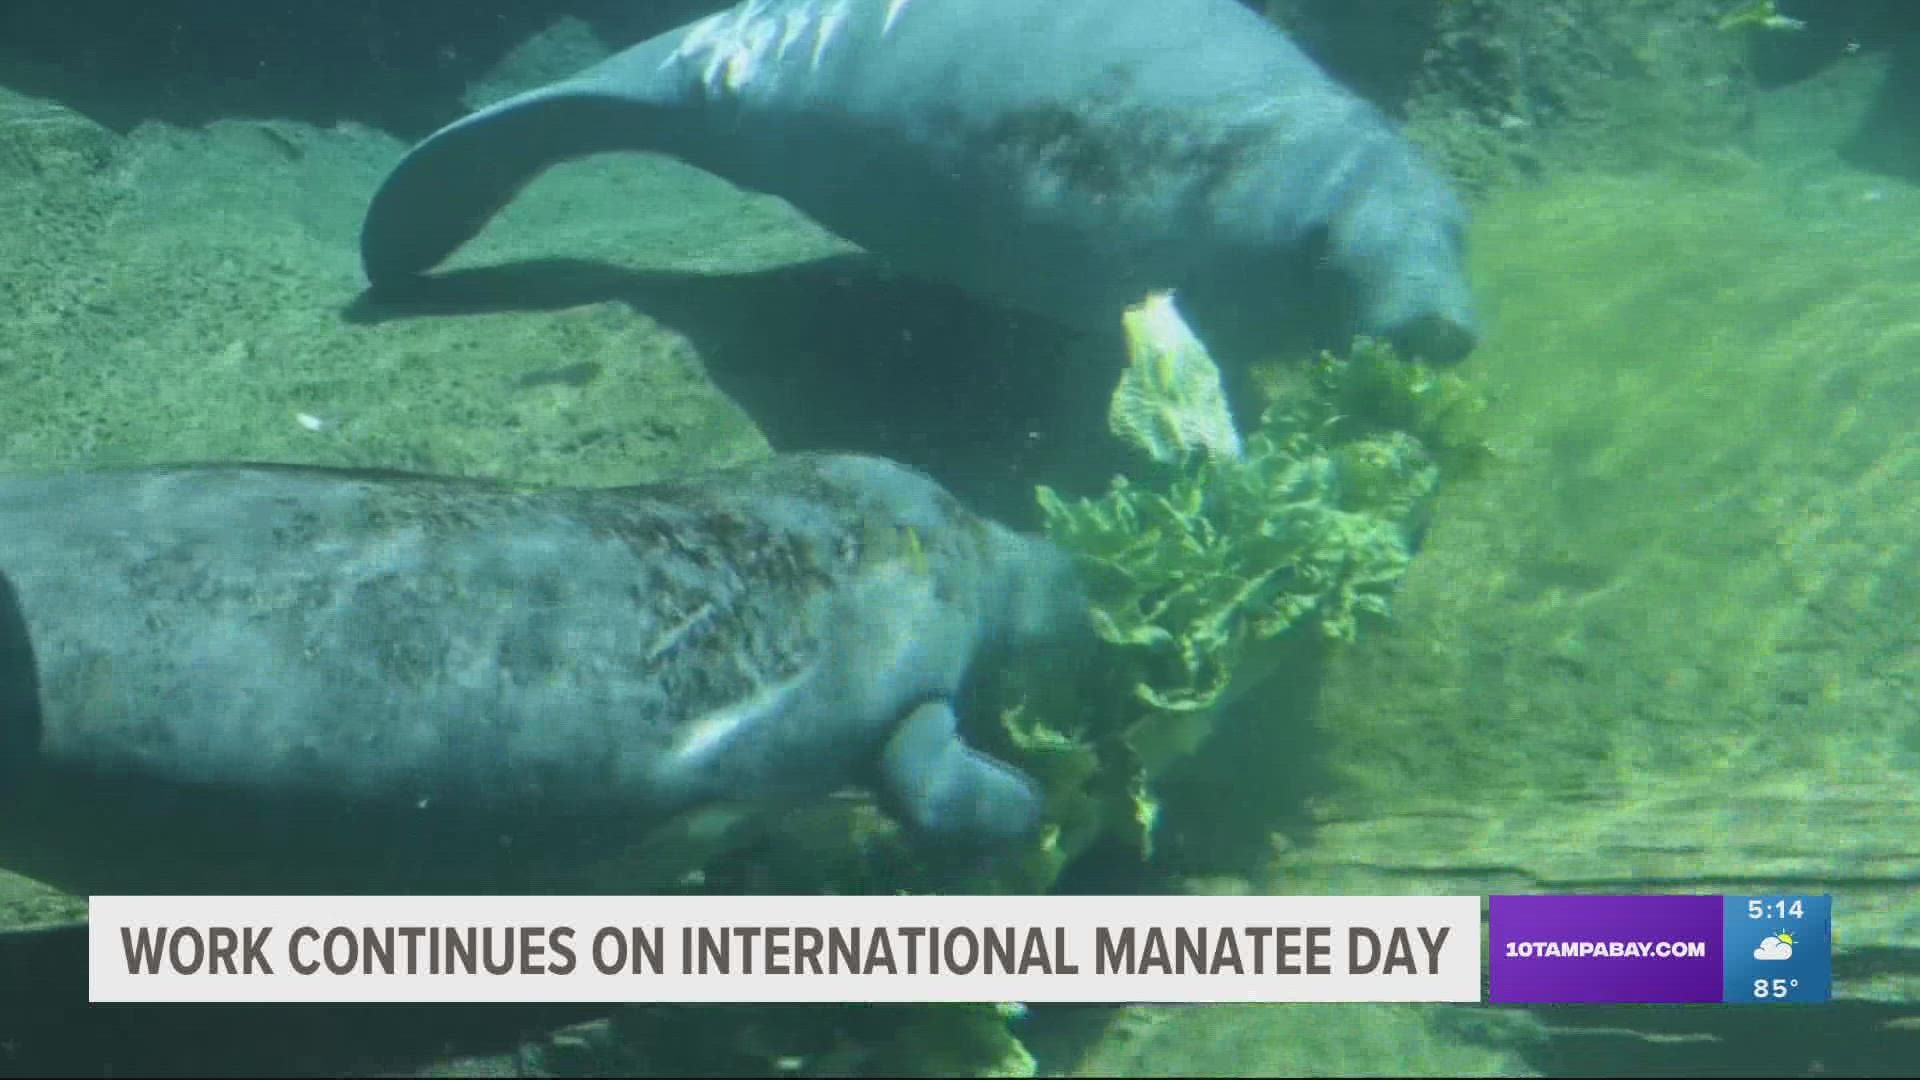 September 7 is International Manatee Day, and conservationists are taking crucial steps to protect Florida's beloved "sea cows."